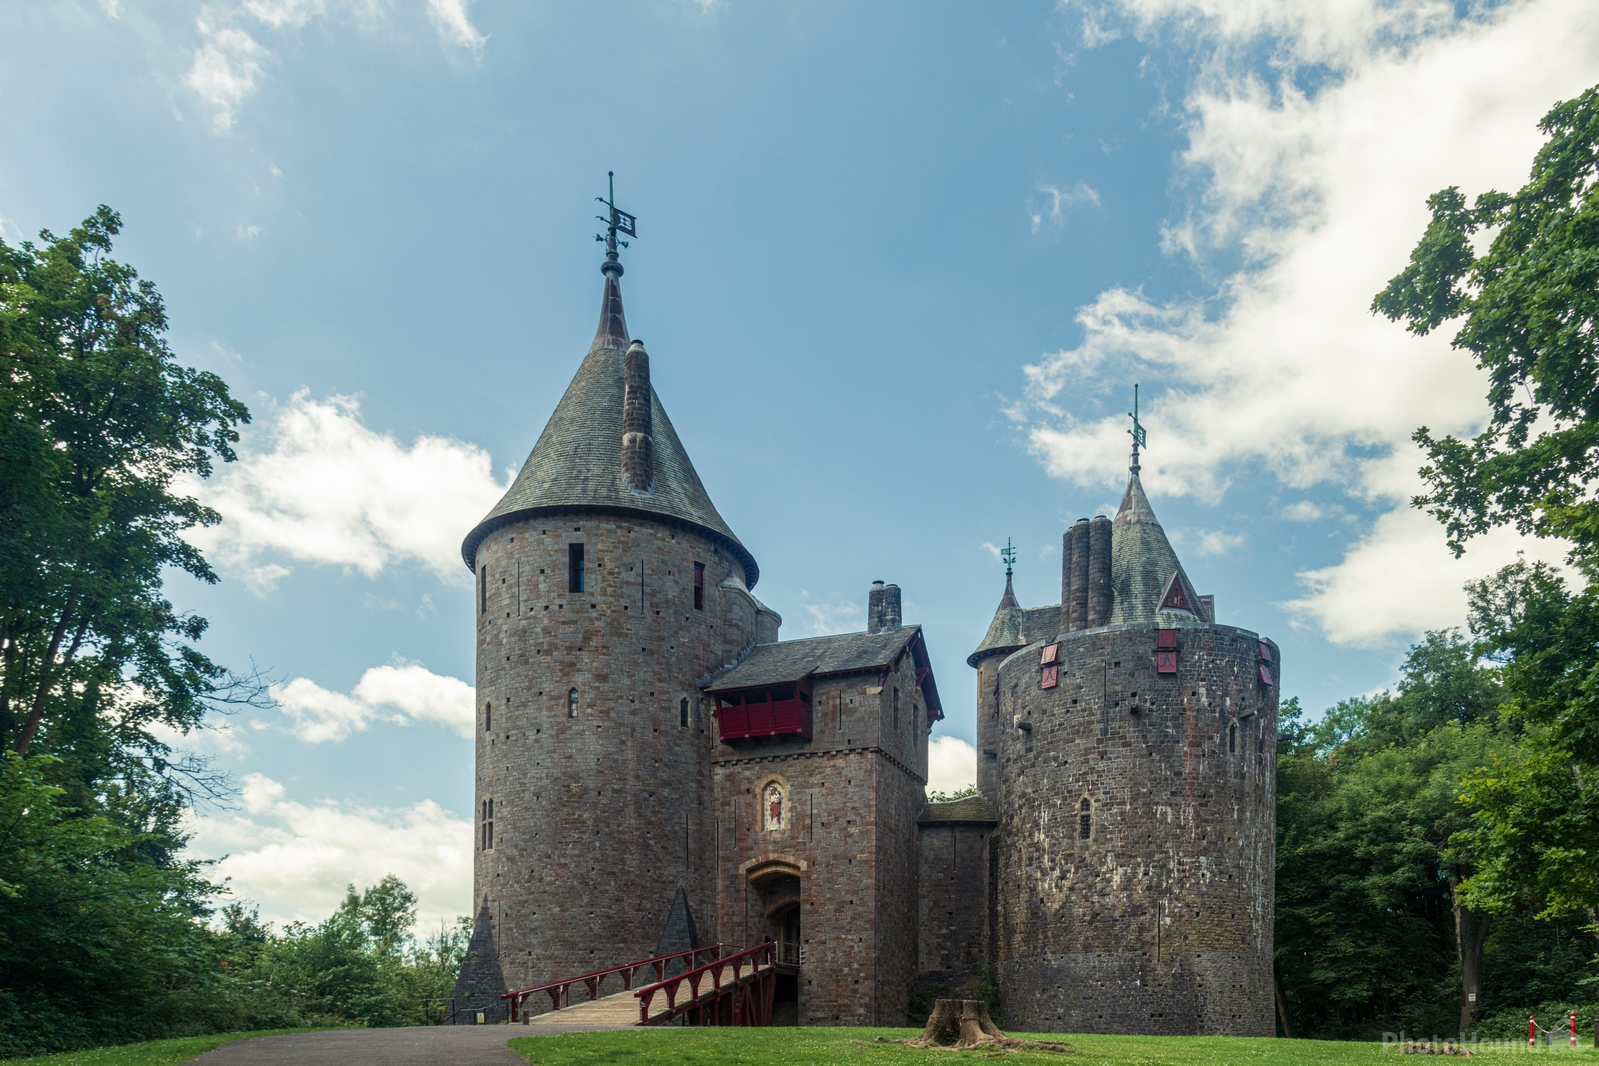 Image of Castell Coch - Exterior by Steven Godwin